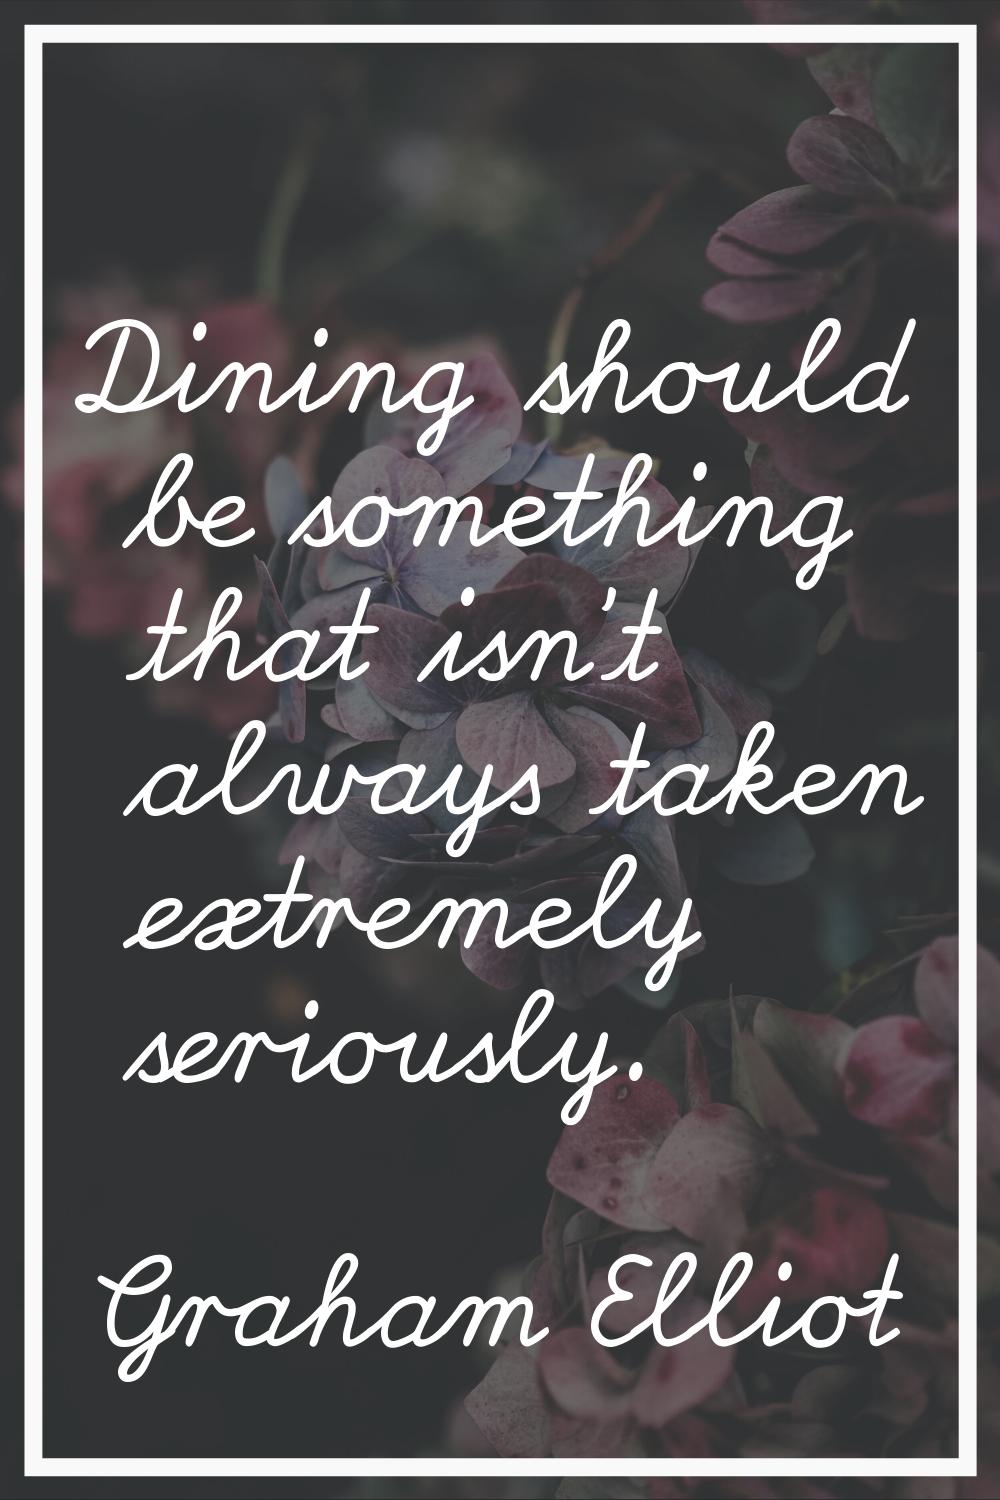 Dining should be something that isn't always taken extremely seriously.